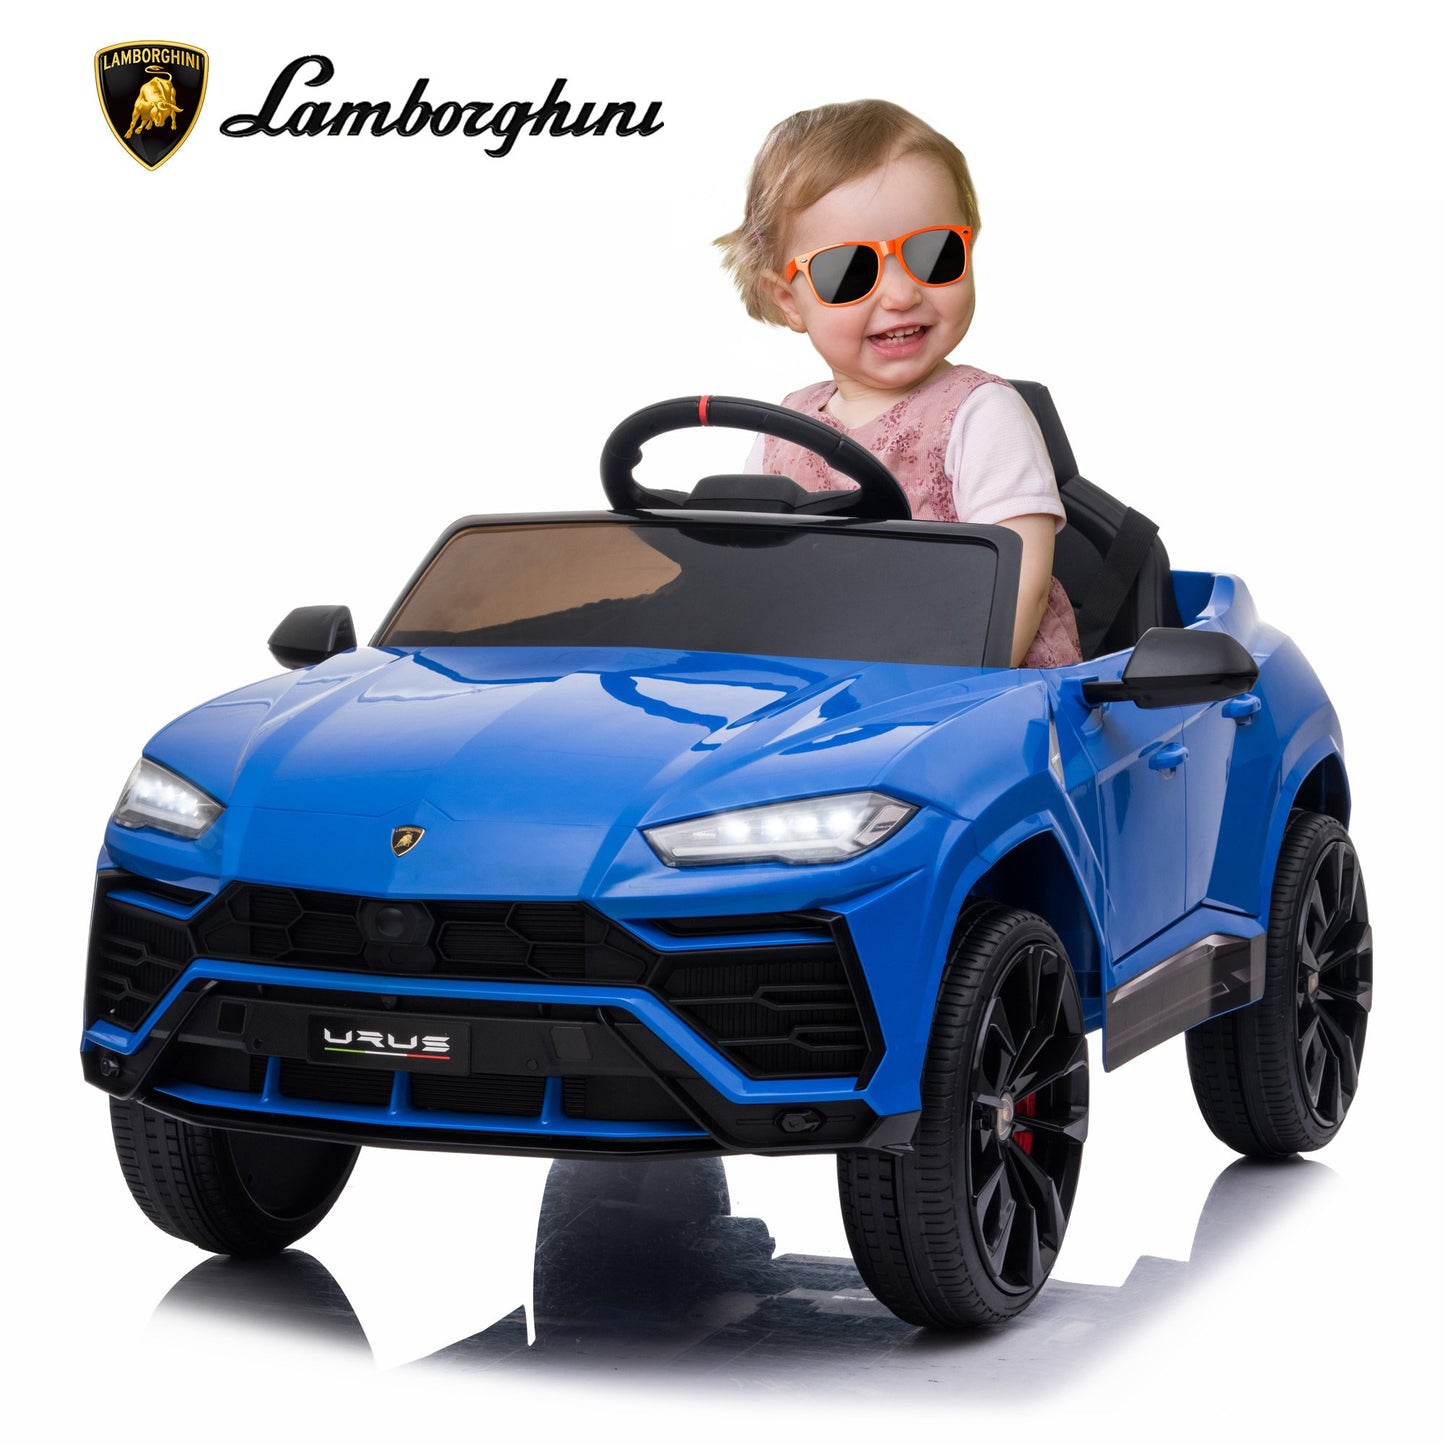 SYNGAR Battery Operated Car Toy for Kids, Licensed Lamborghini Ride on Cars with Remote Control, 3 Speeds, LED Lights, Player, Horn, Electric Vehicle Kids Party Gift, Blue